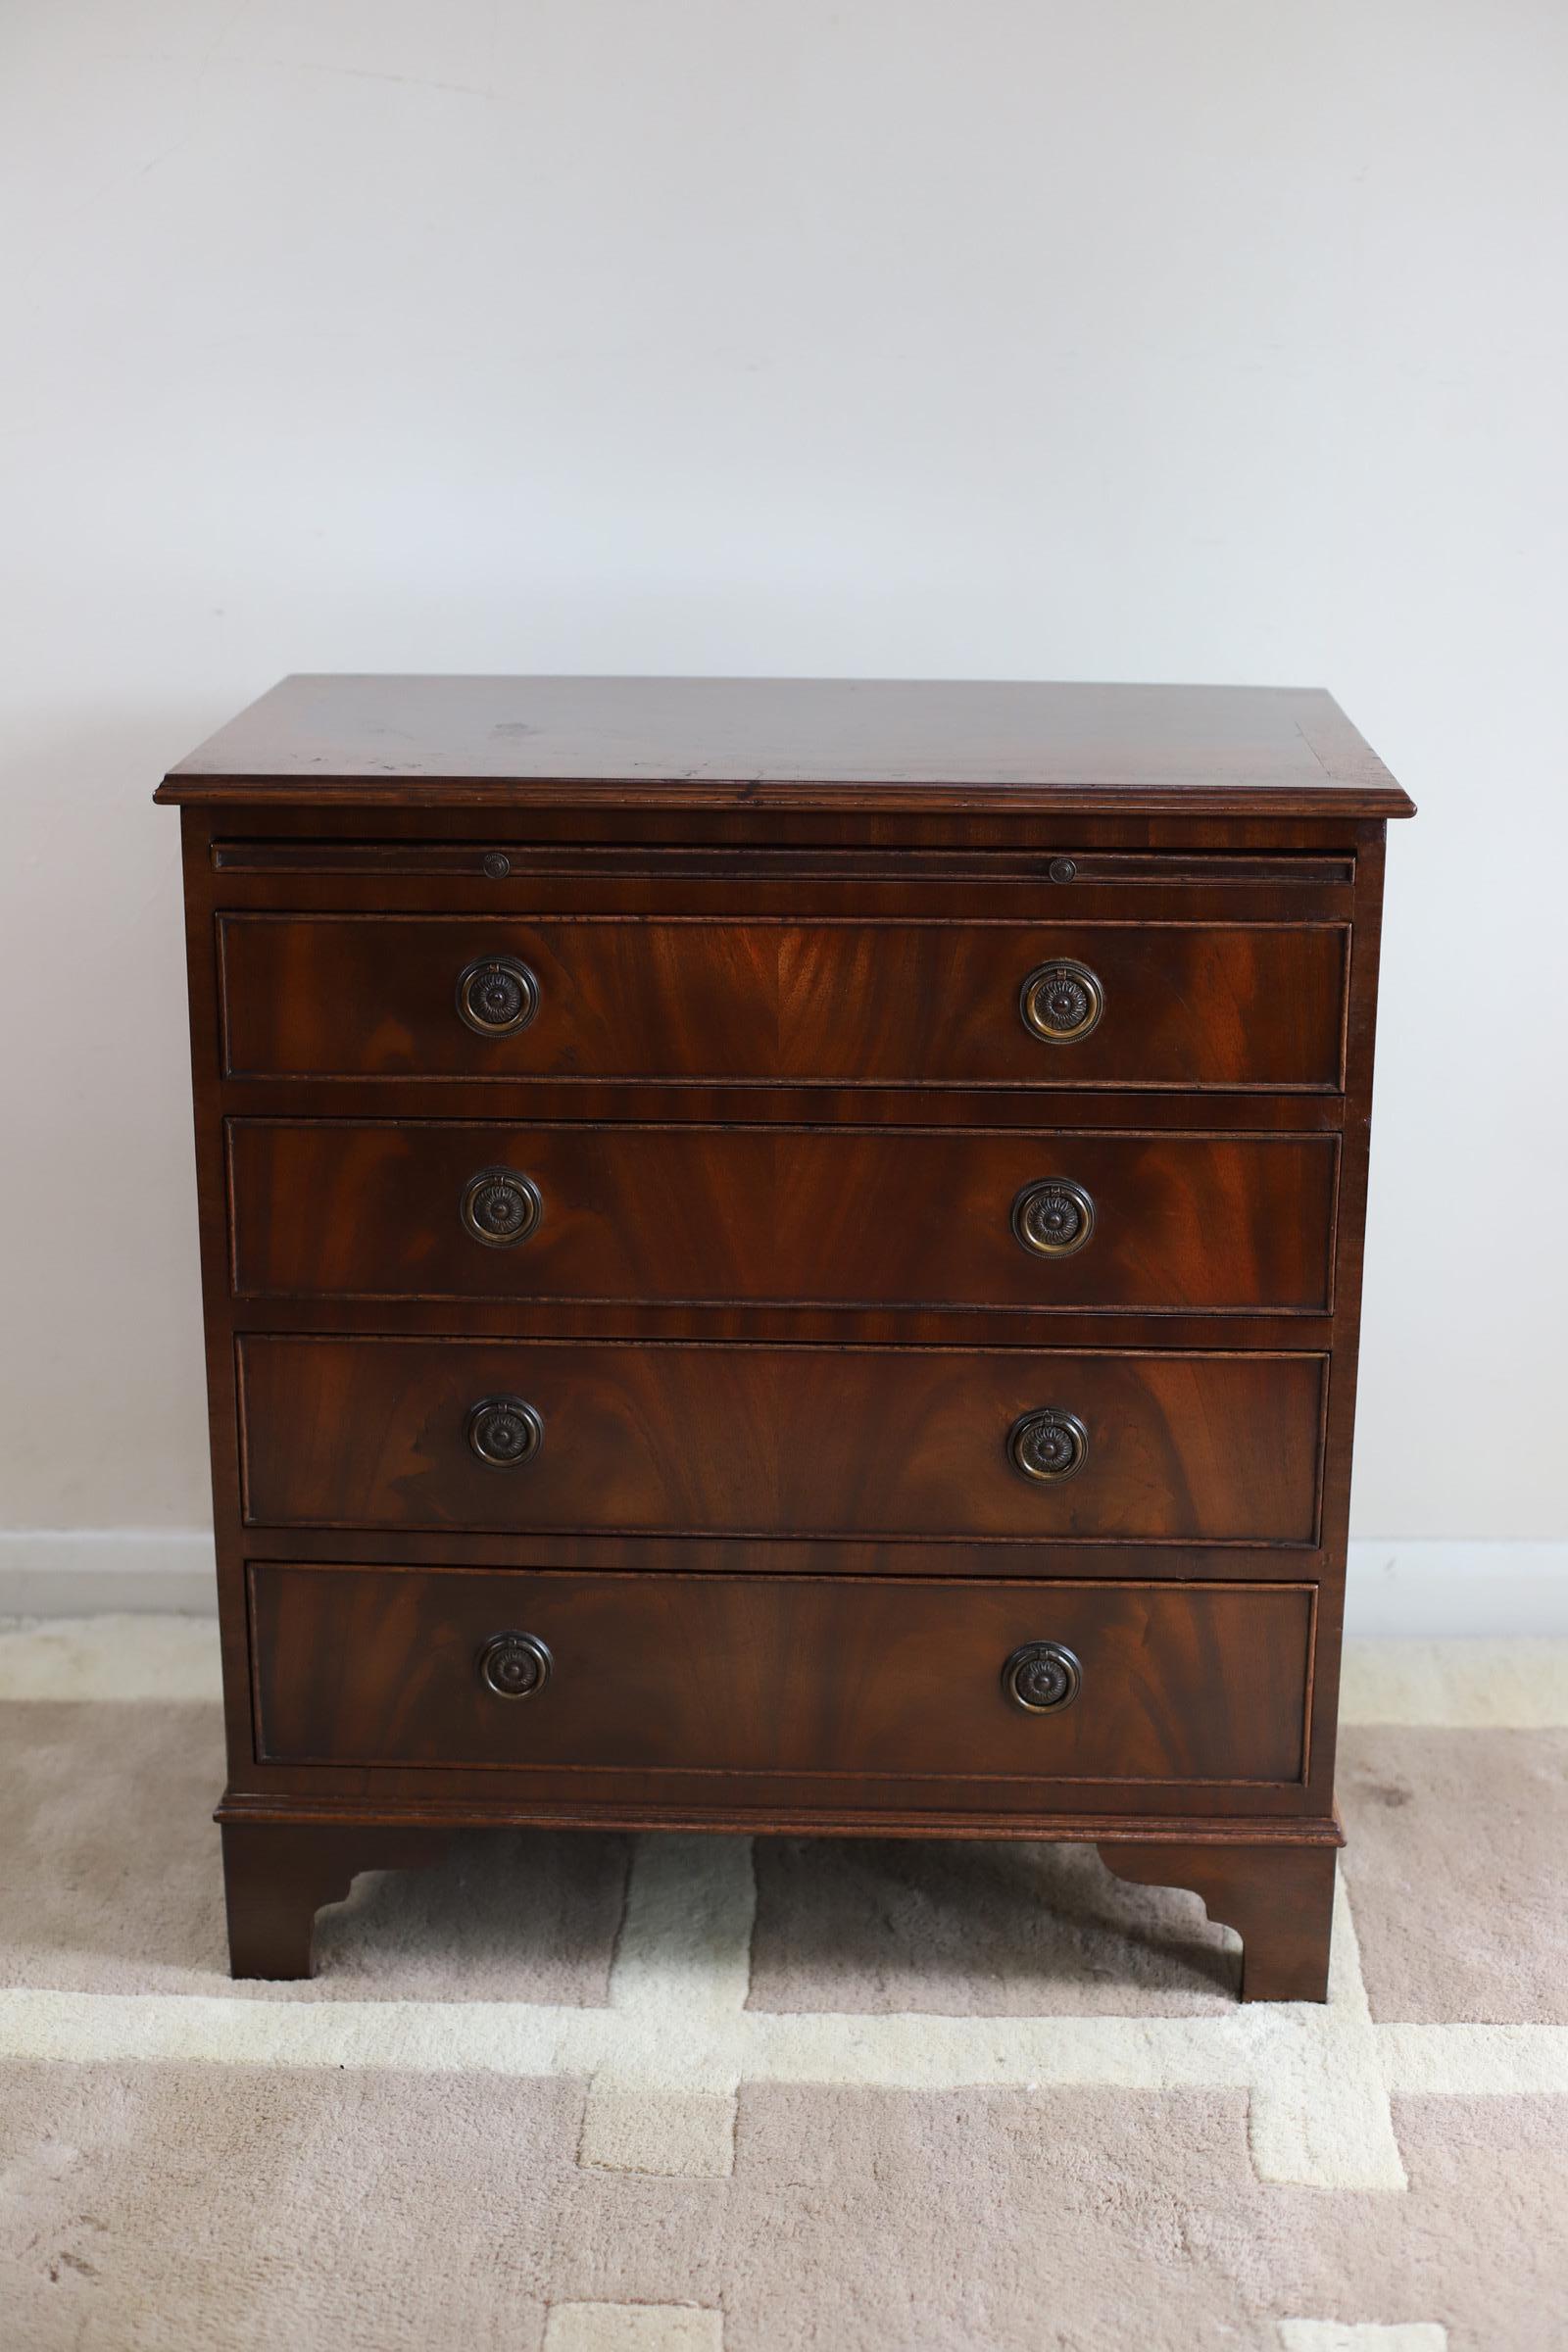 British Lovely George III Style Mahogany Bachelor's Chest of Drawers